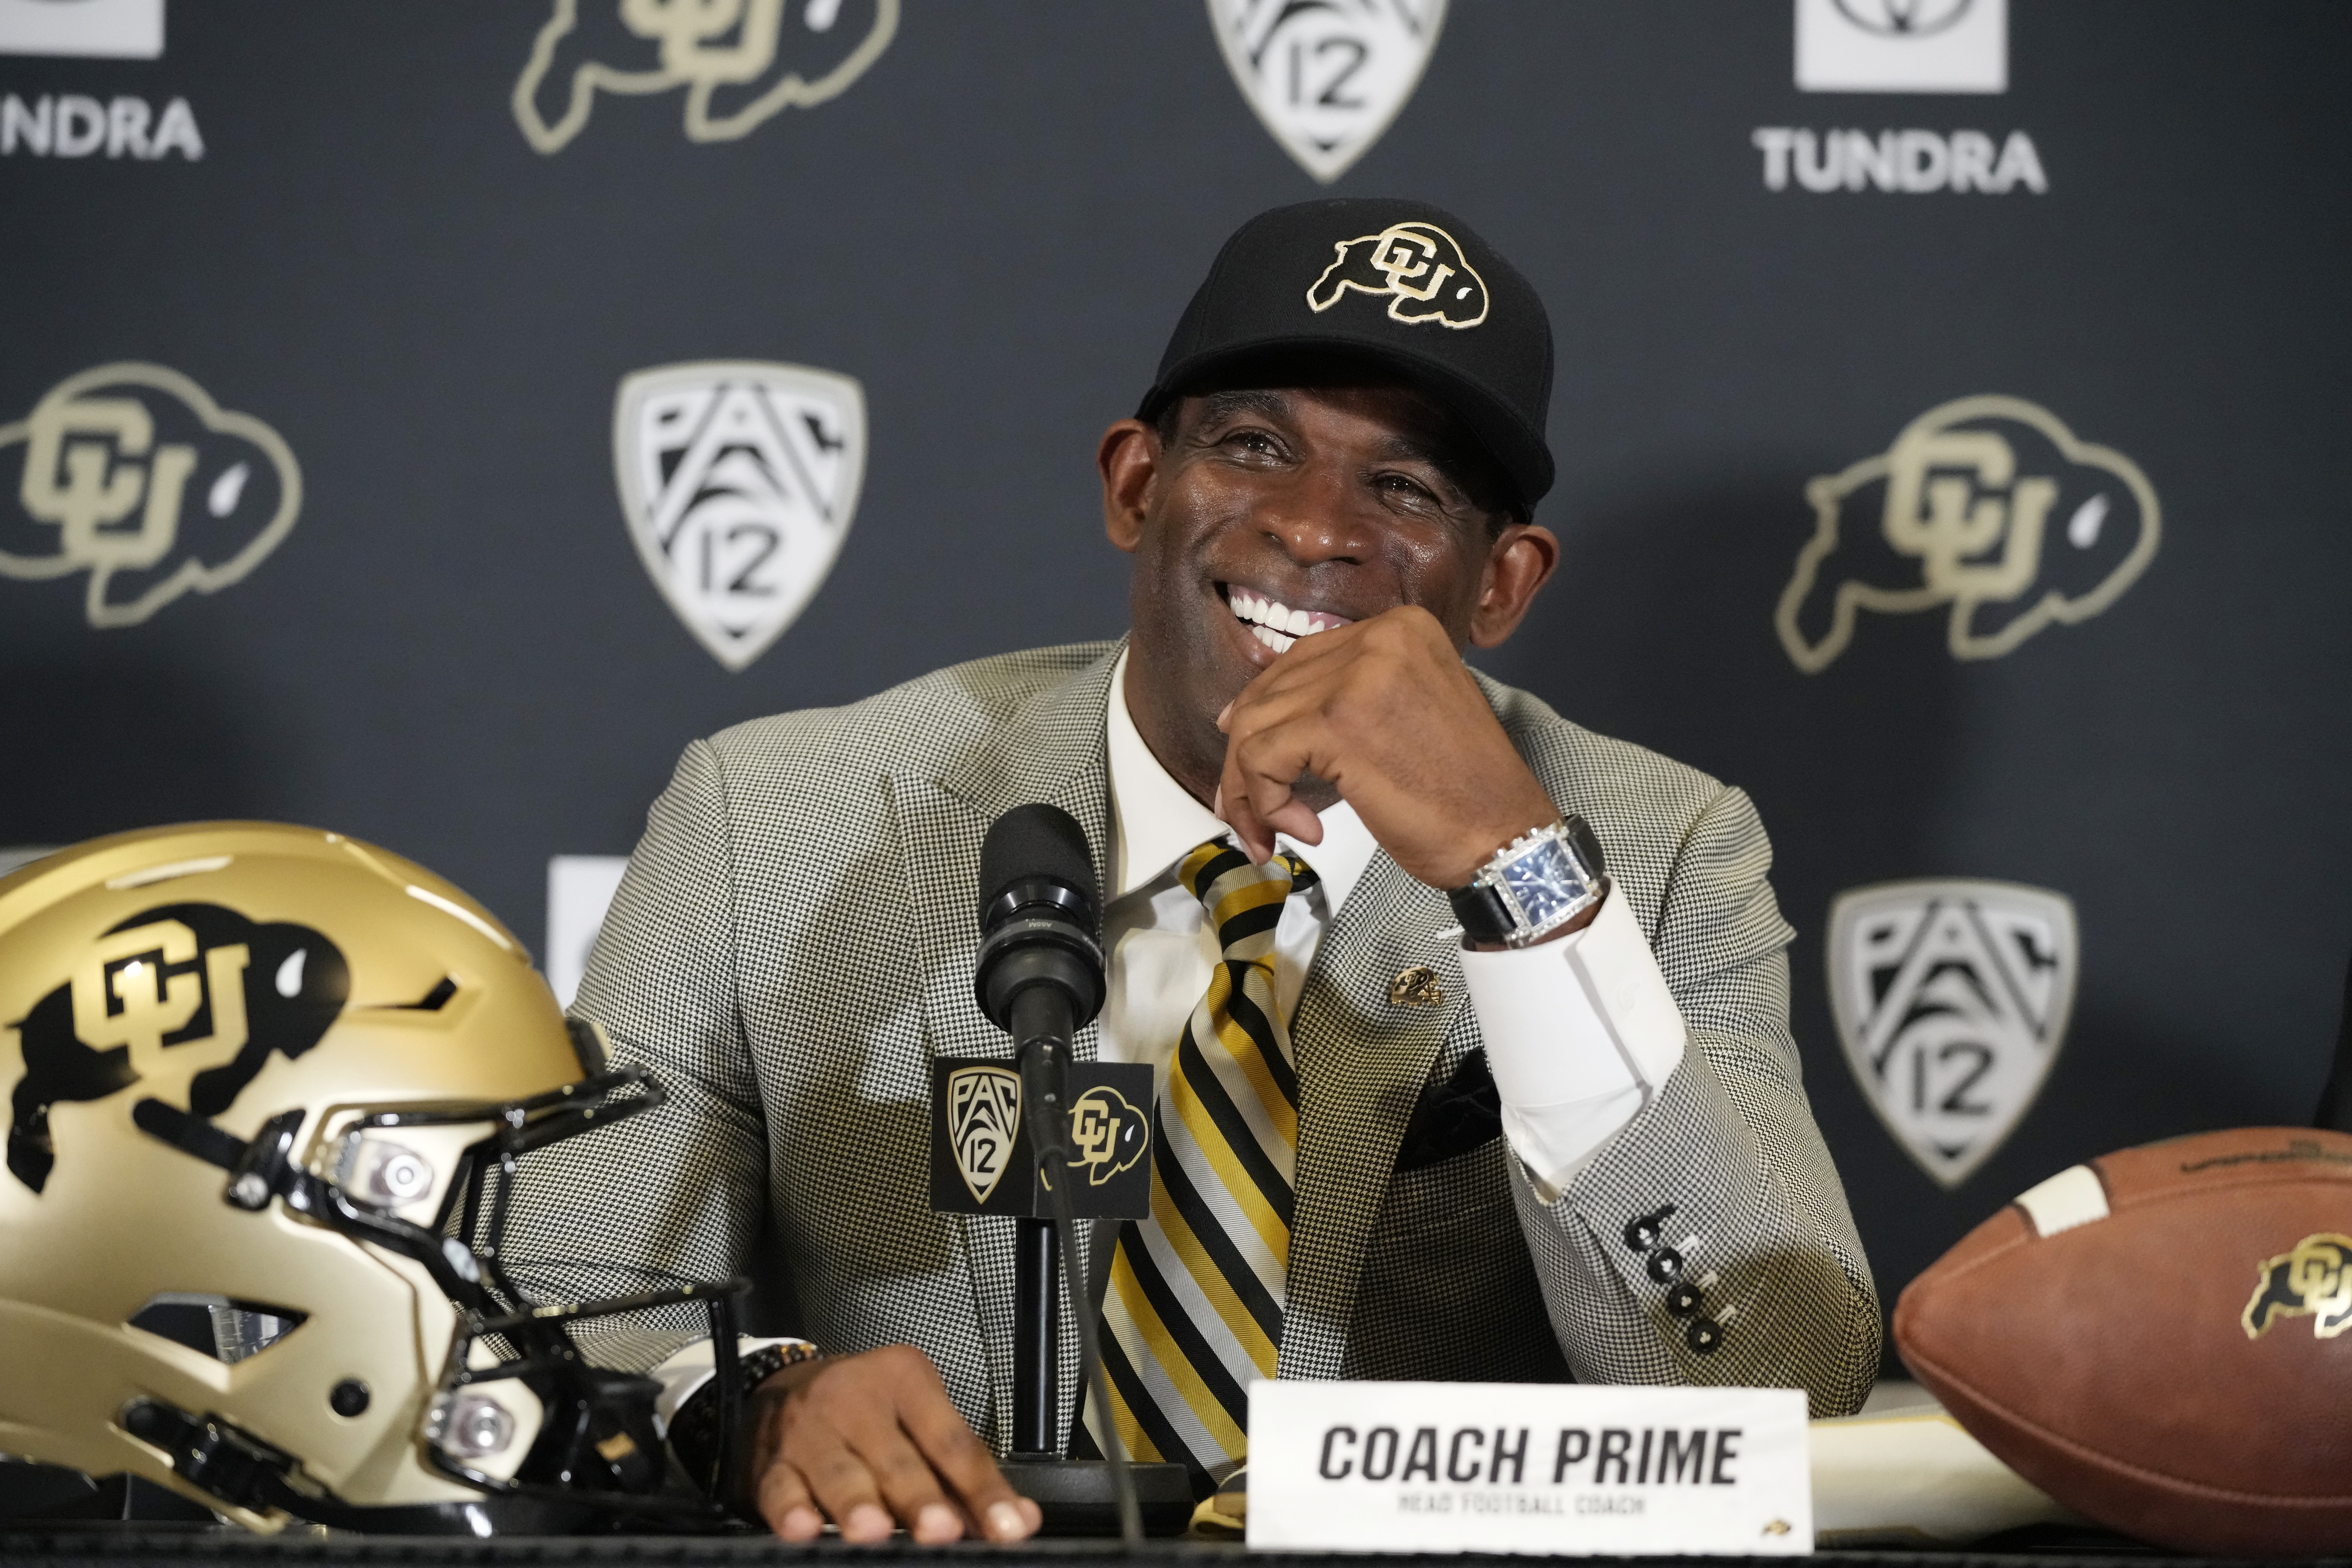 Deion Sanders teases new uniforms are coming for Colorado - BVM Sports